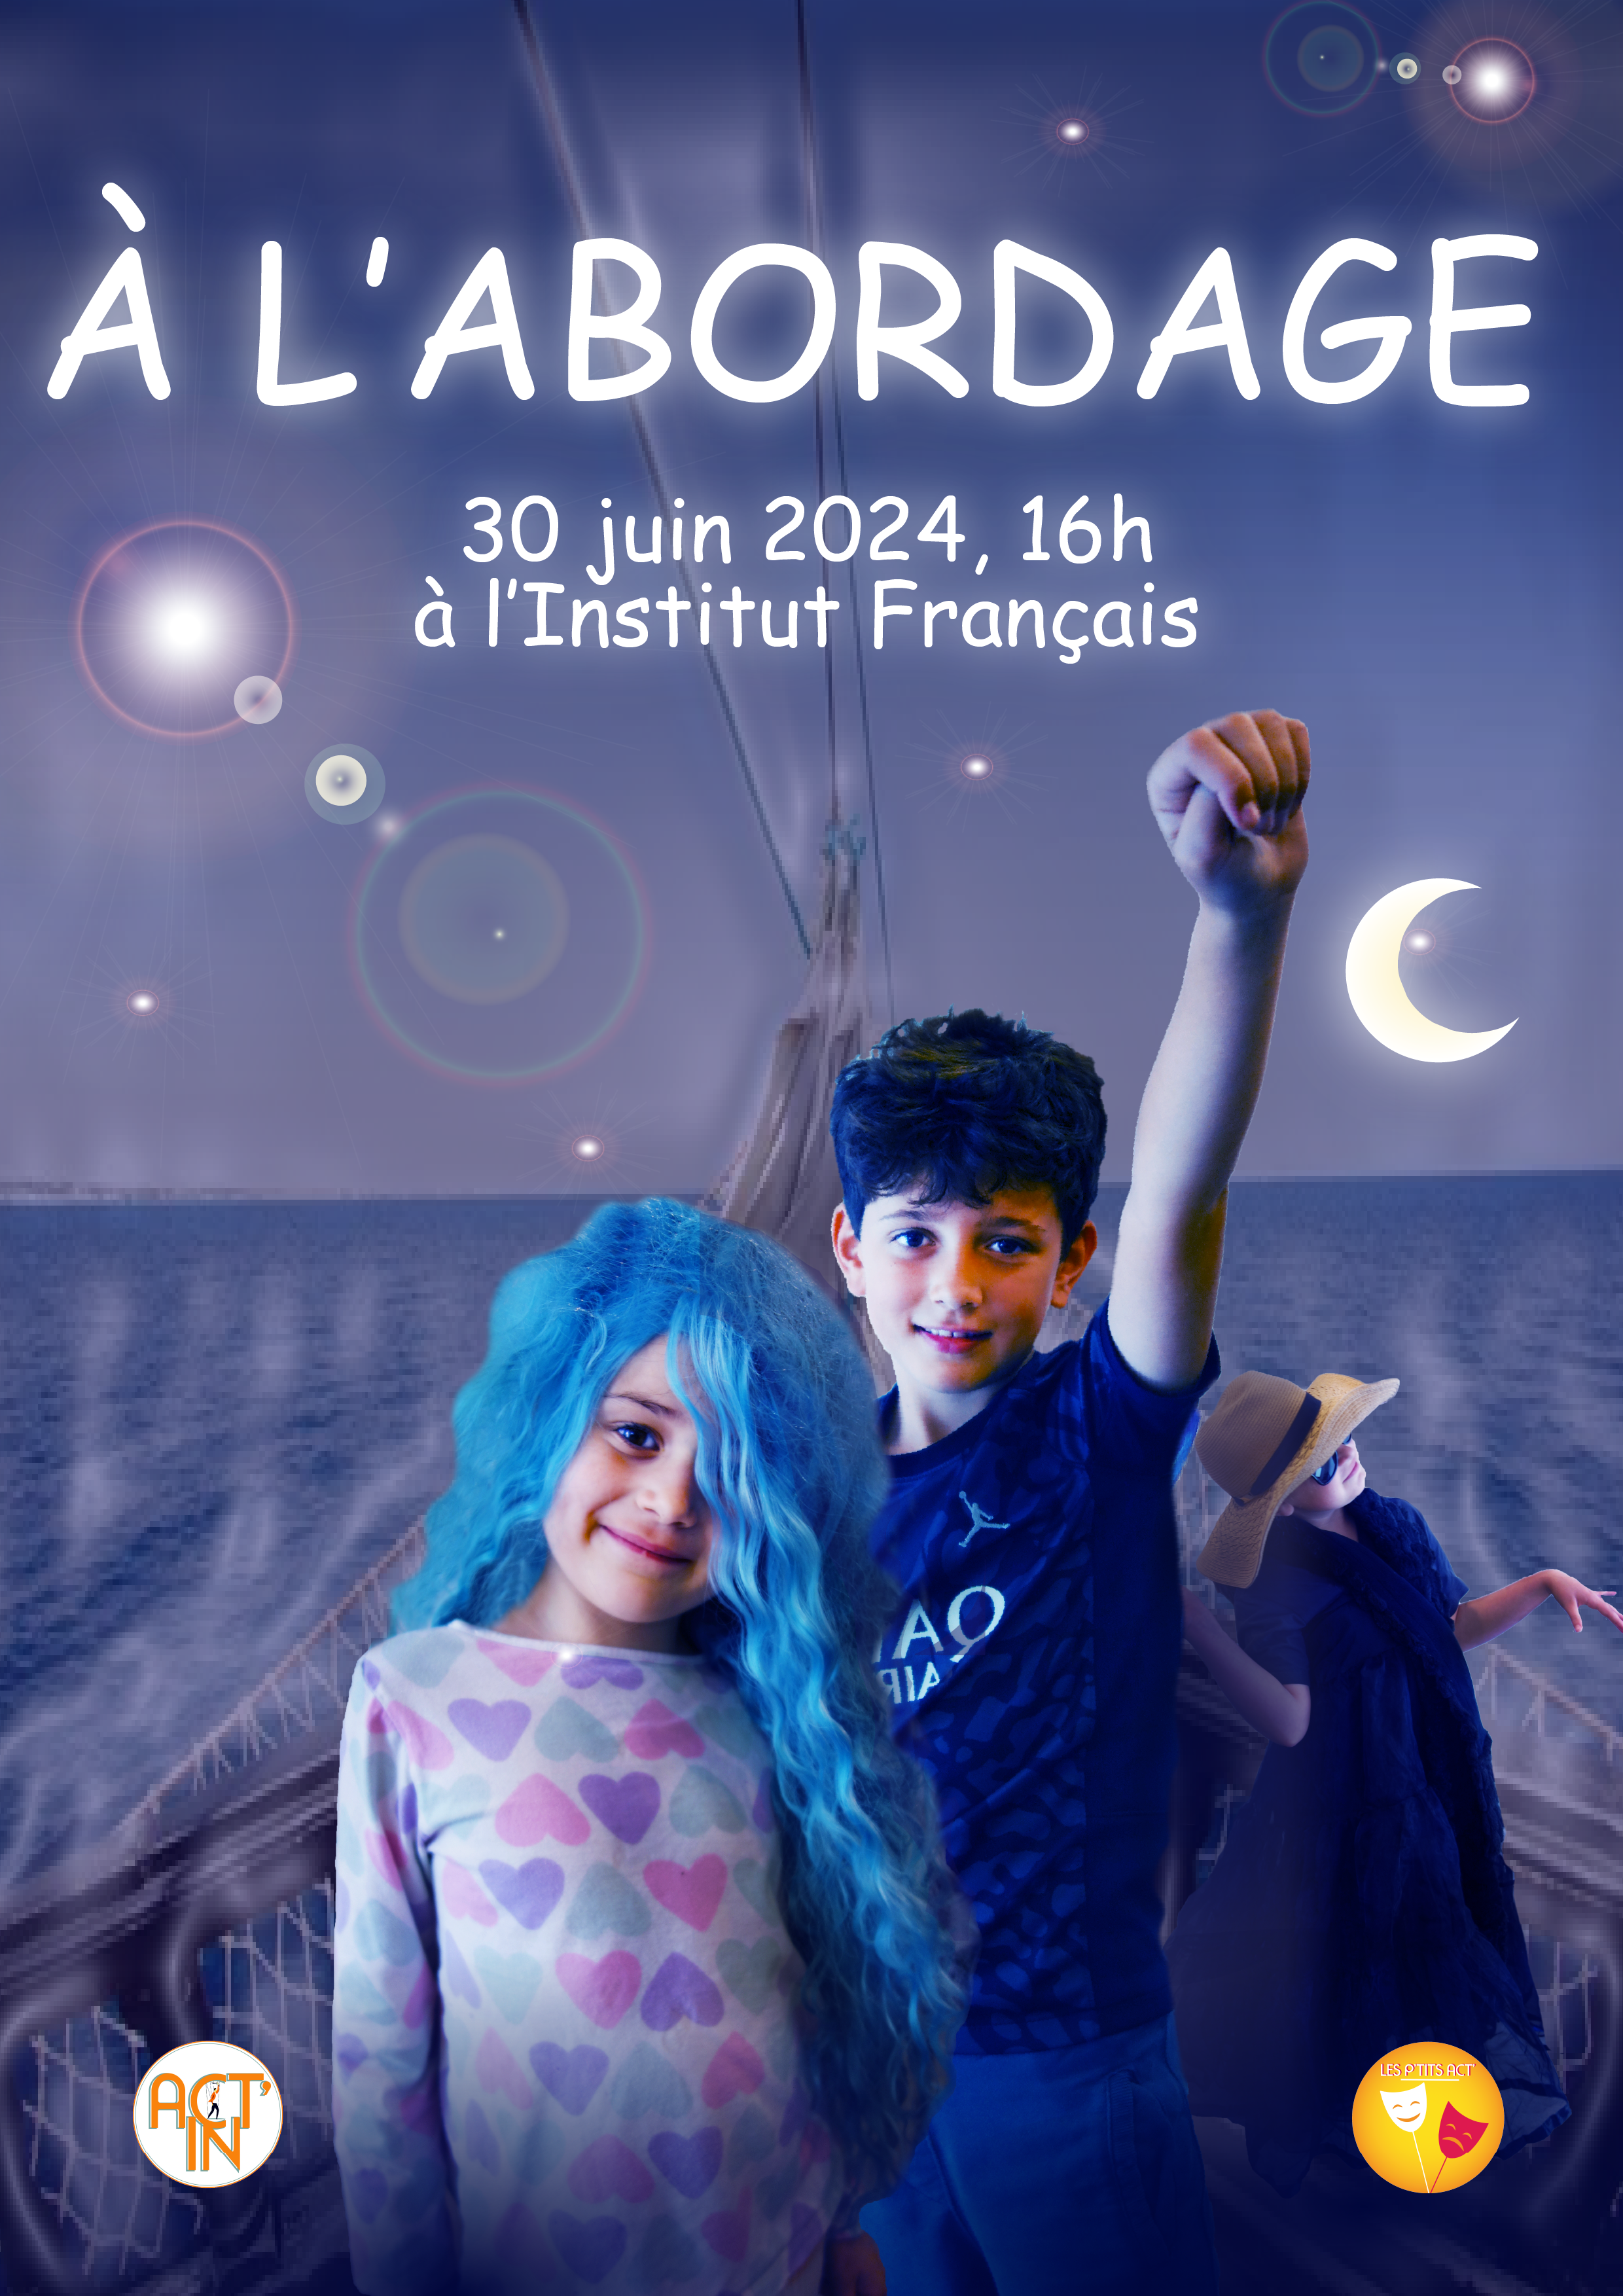 Poster for our show "A l'Abordage". At the center bottom, a mermaid with blue hair and a footballer with his arm raised, interpreted by two children, are standing together on a nightly boat prow background. Colors are blue and purple, there is a moon in the right hand corner. There is a caption indicating the date, time and place of the show (30th June at the French Institute).